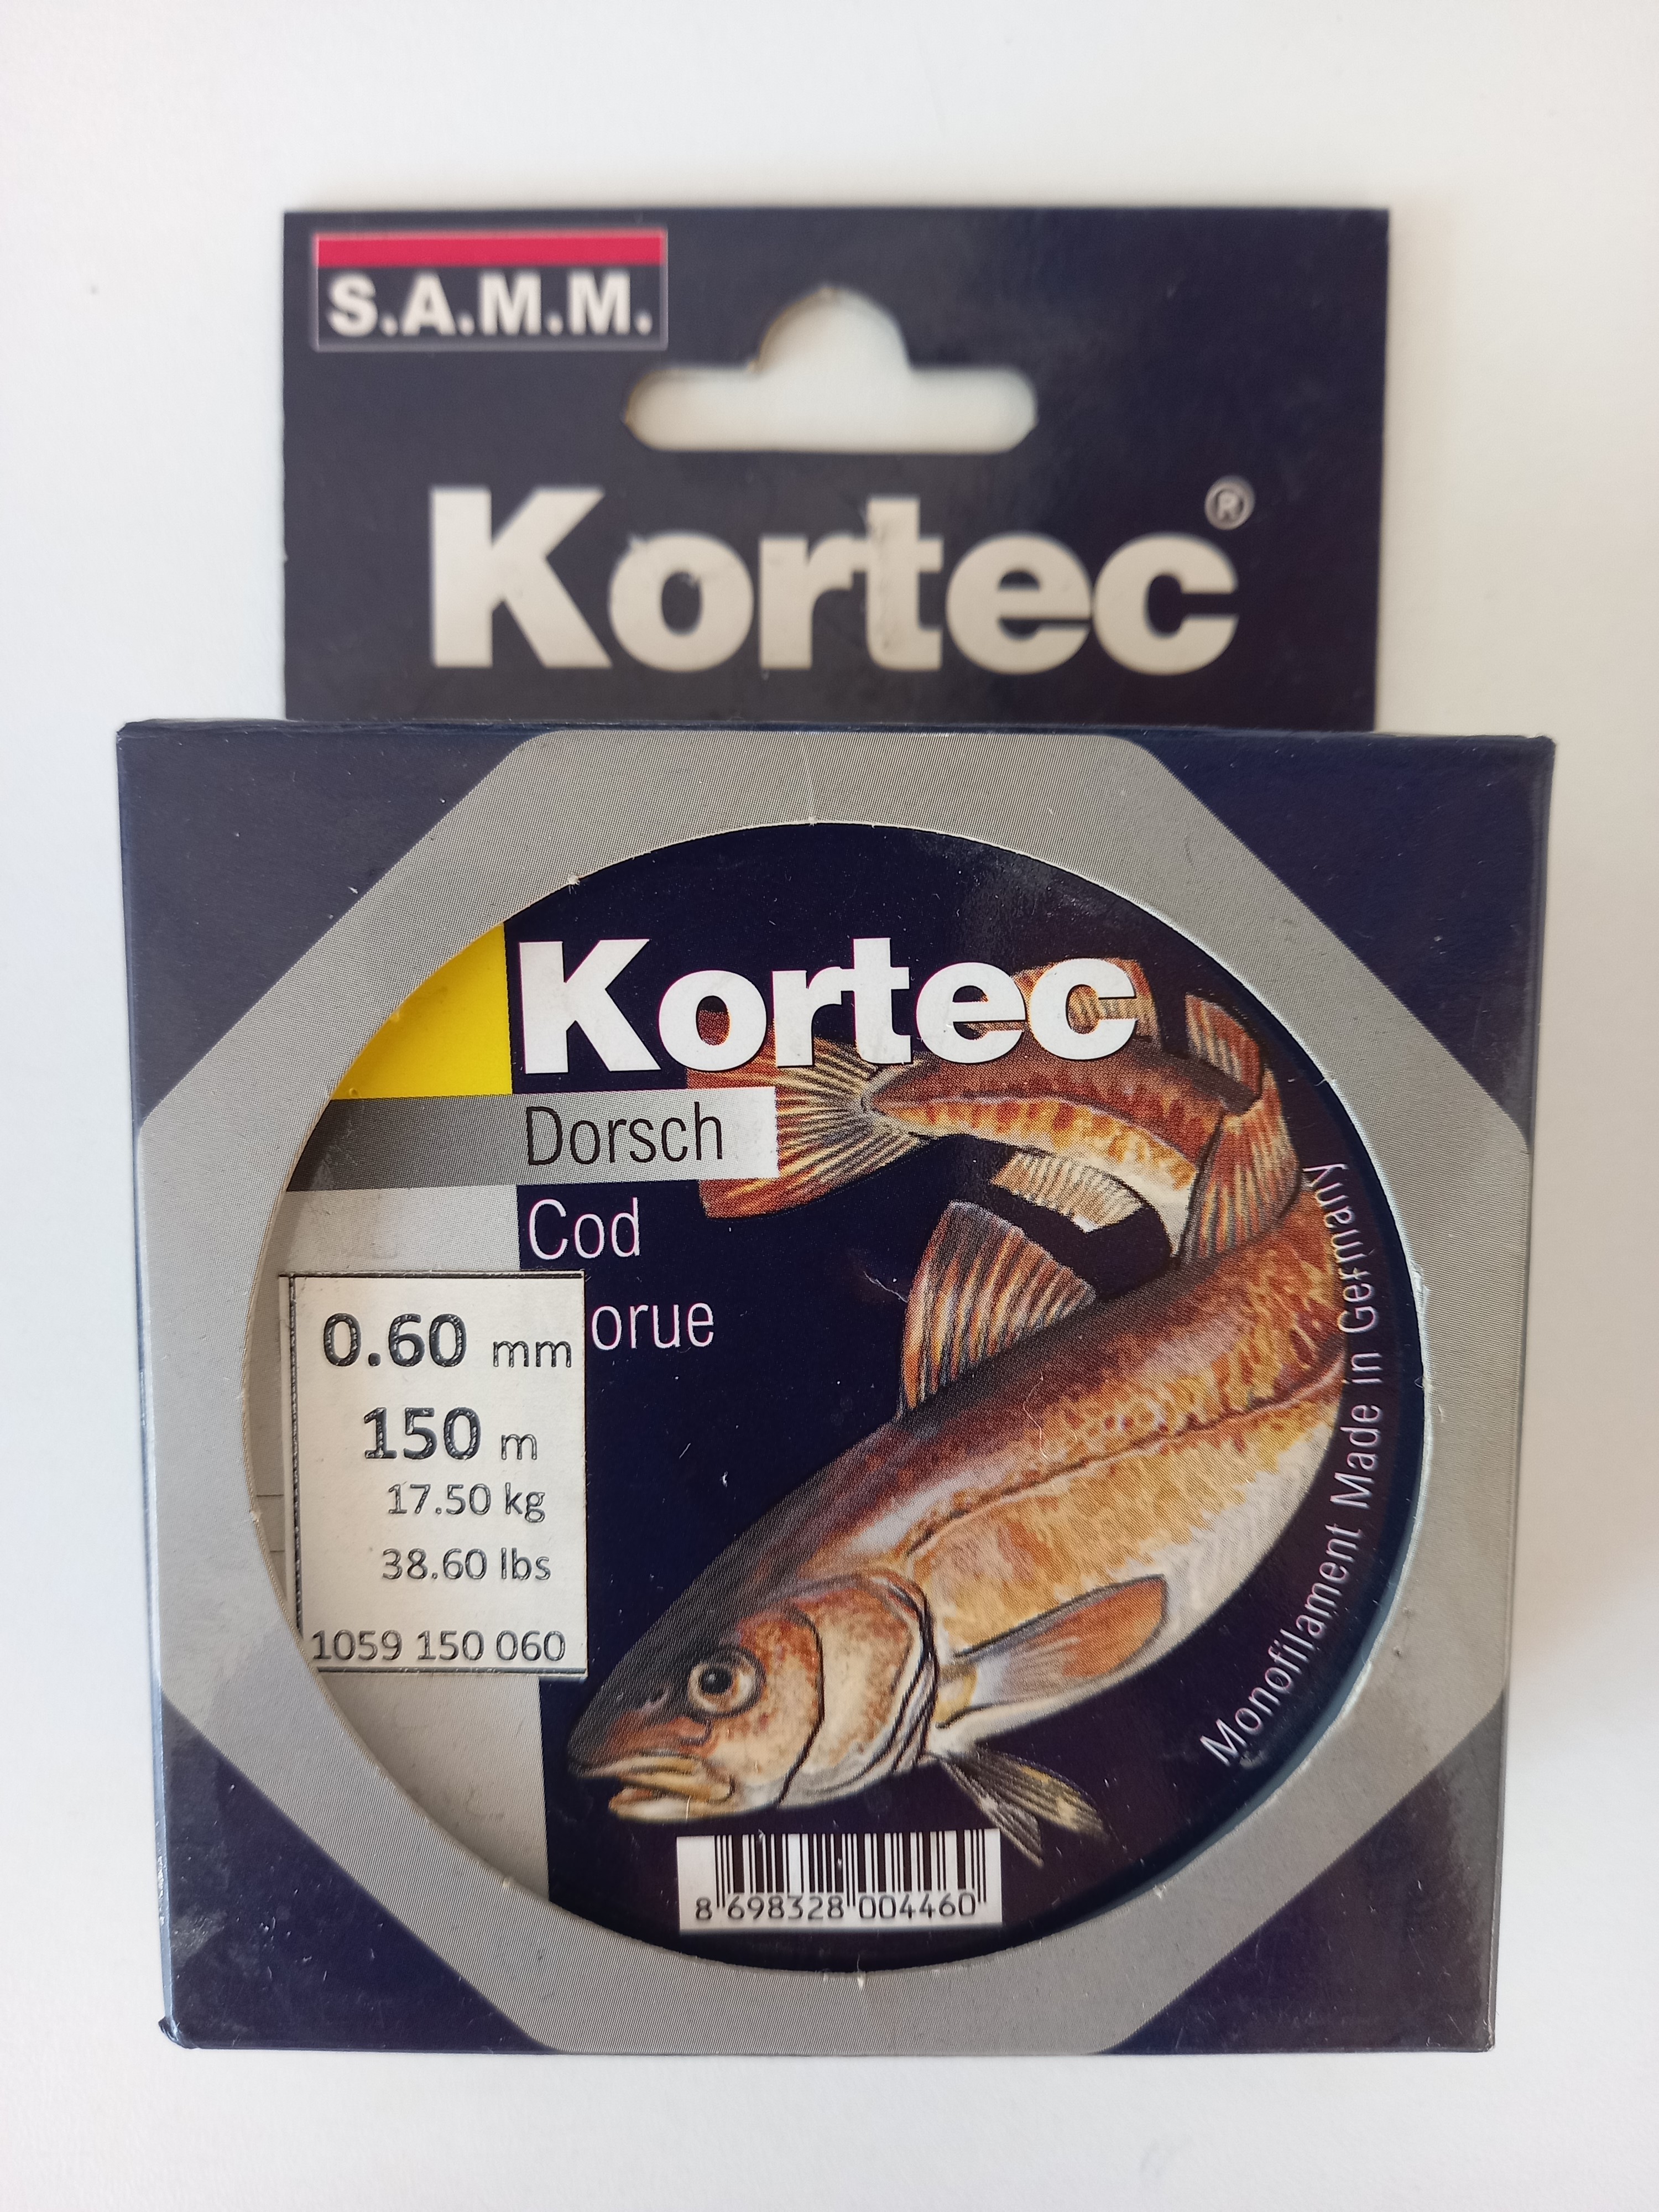 S.A.M.M. KORTEC (MADE IN GERMANY)